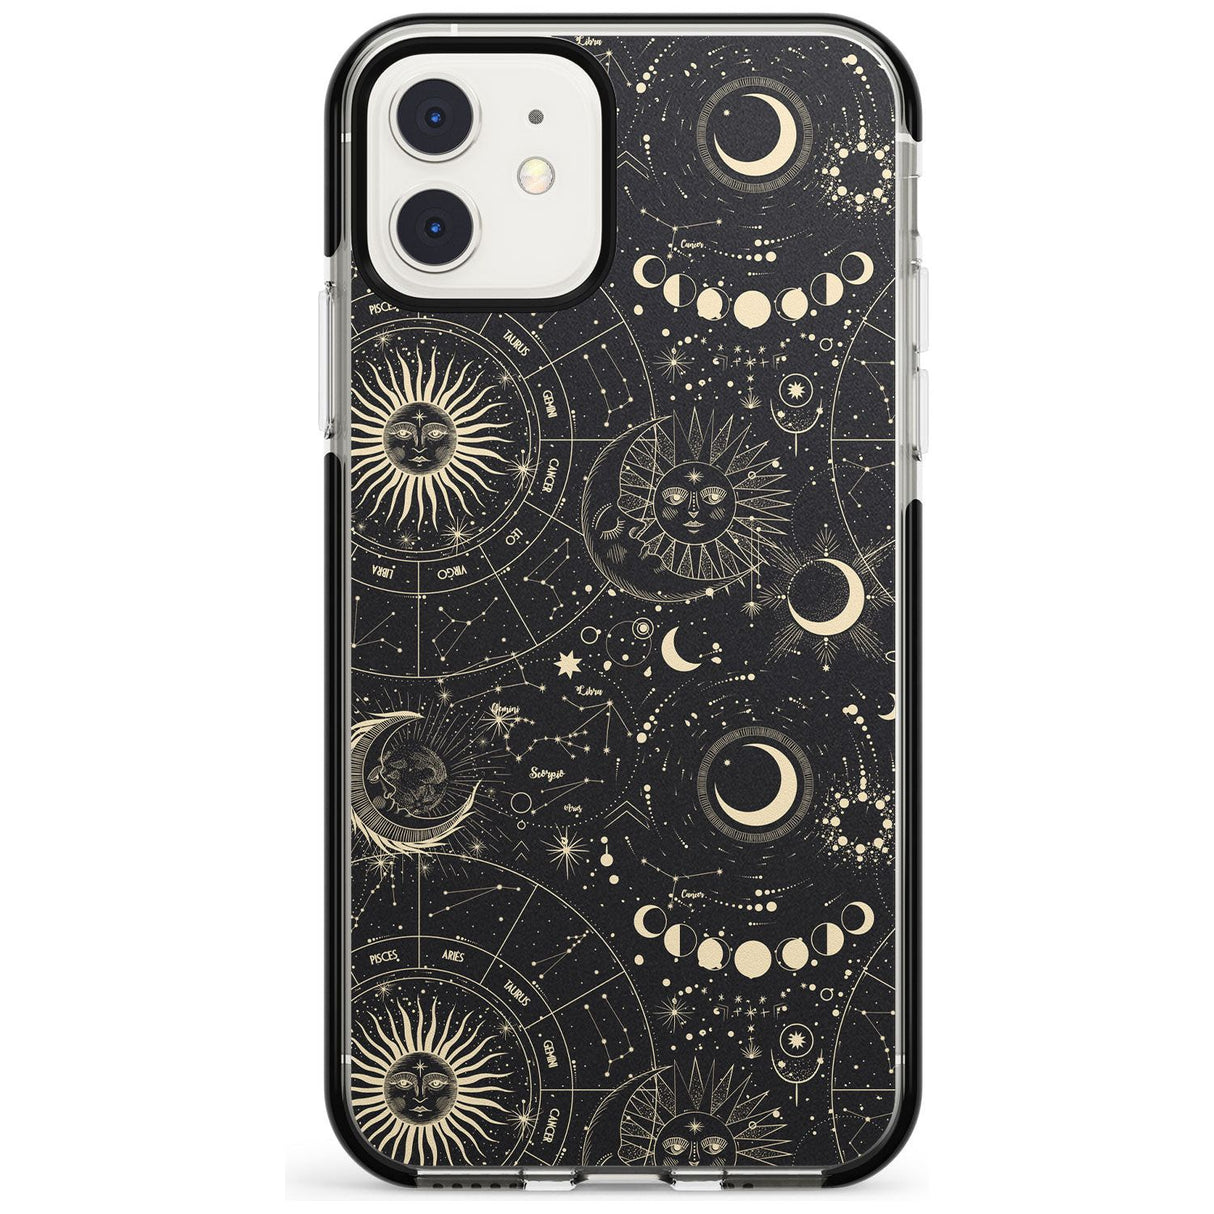 Suns, Moons & Star Signs Pink Fade Impact Phone Case for iPhone 11 Pro Max